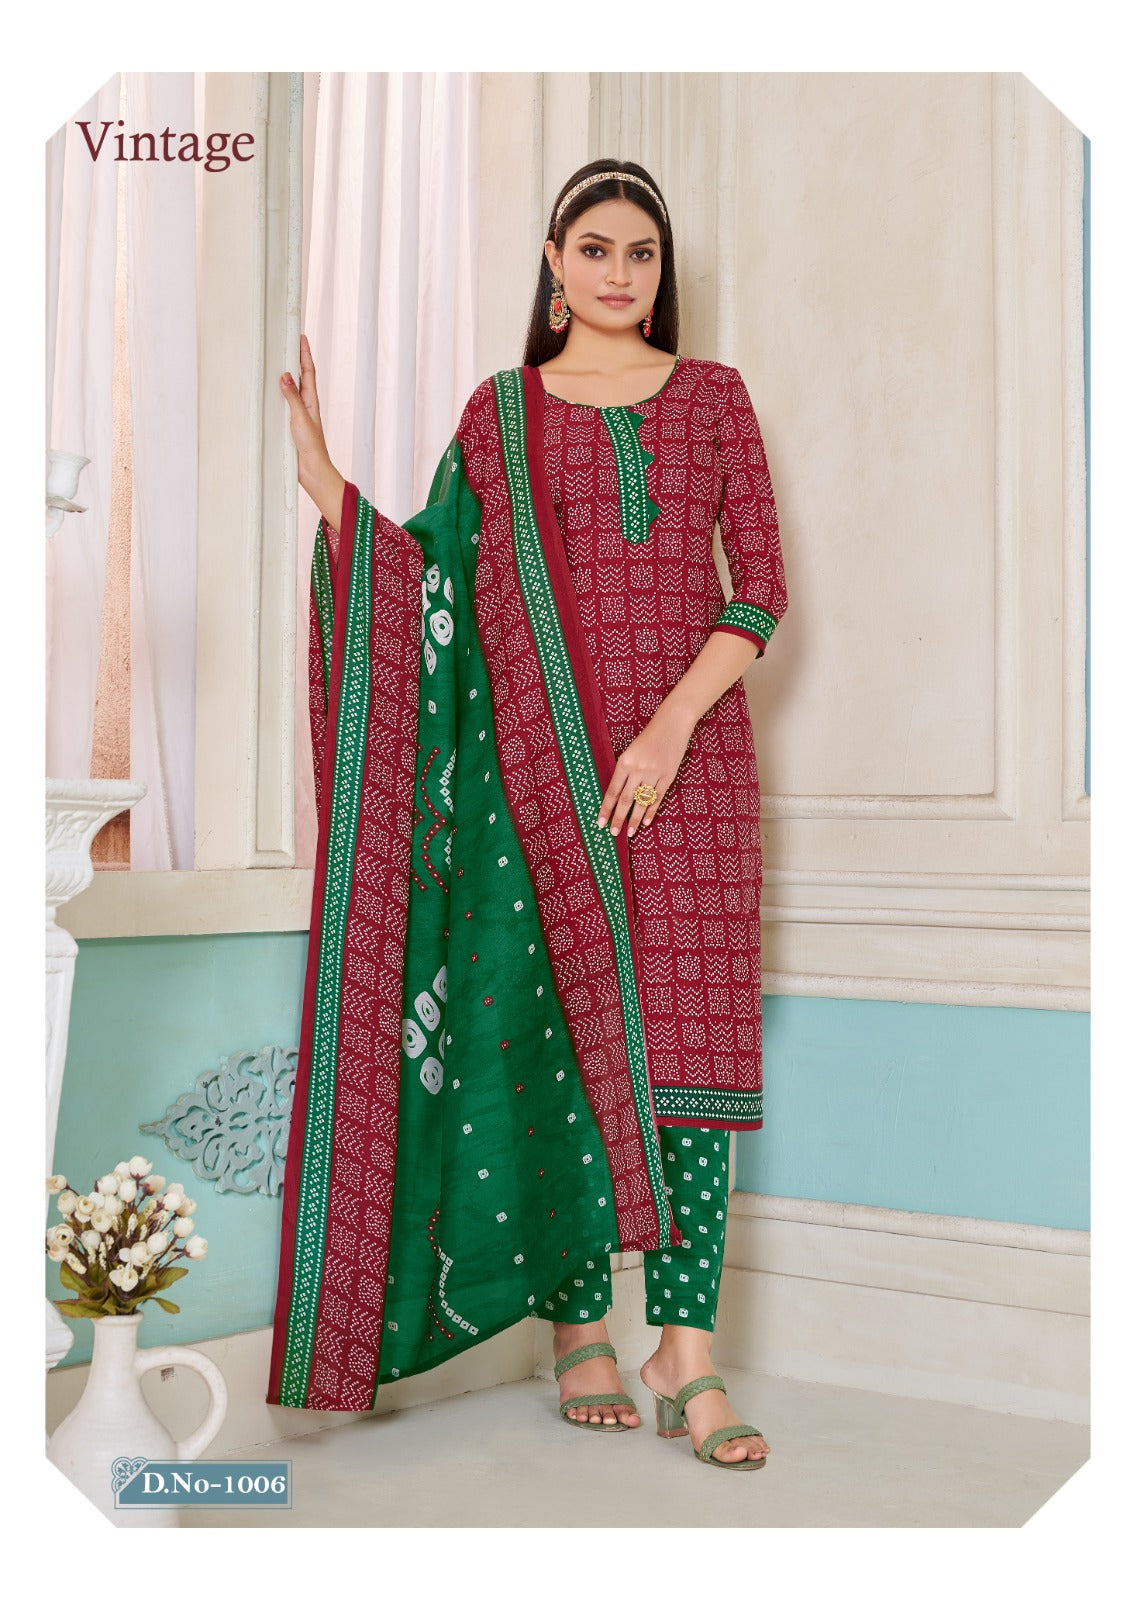 Buy Printed Dress Material Set + 1 Kurti Fabric Free - Pick Any 1 (2PDM-2)  Online at Best Price in India on Naaptol.com